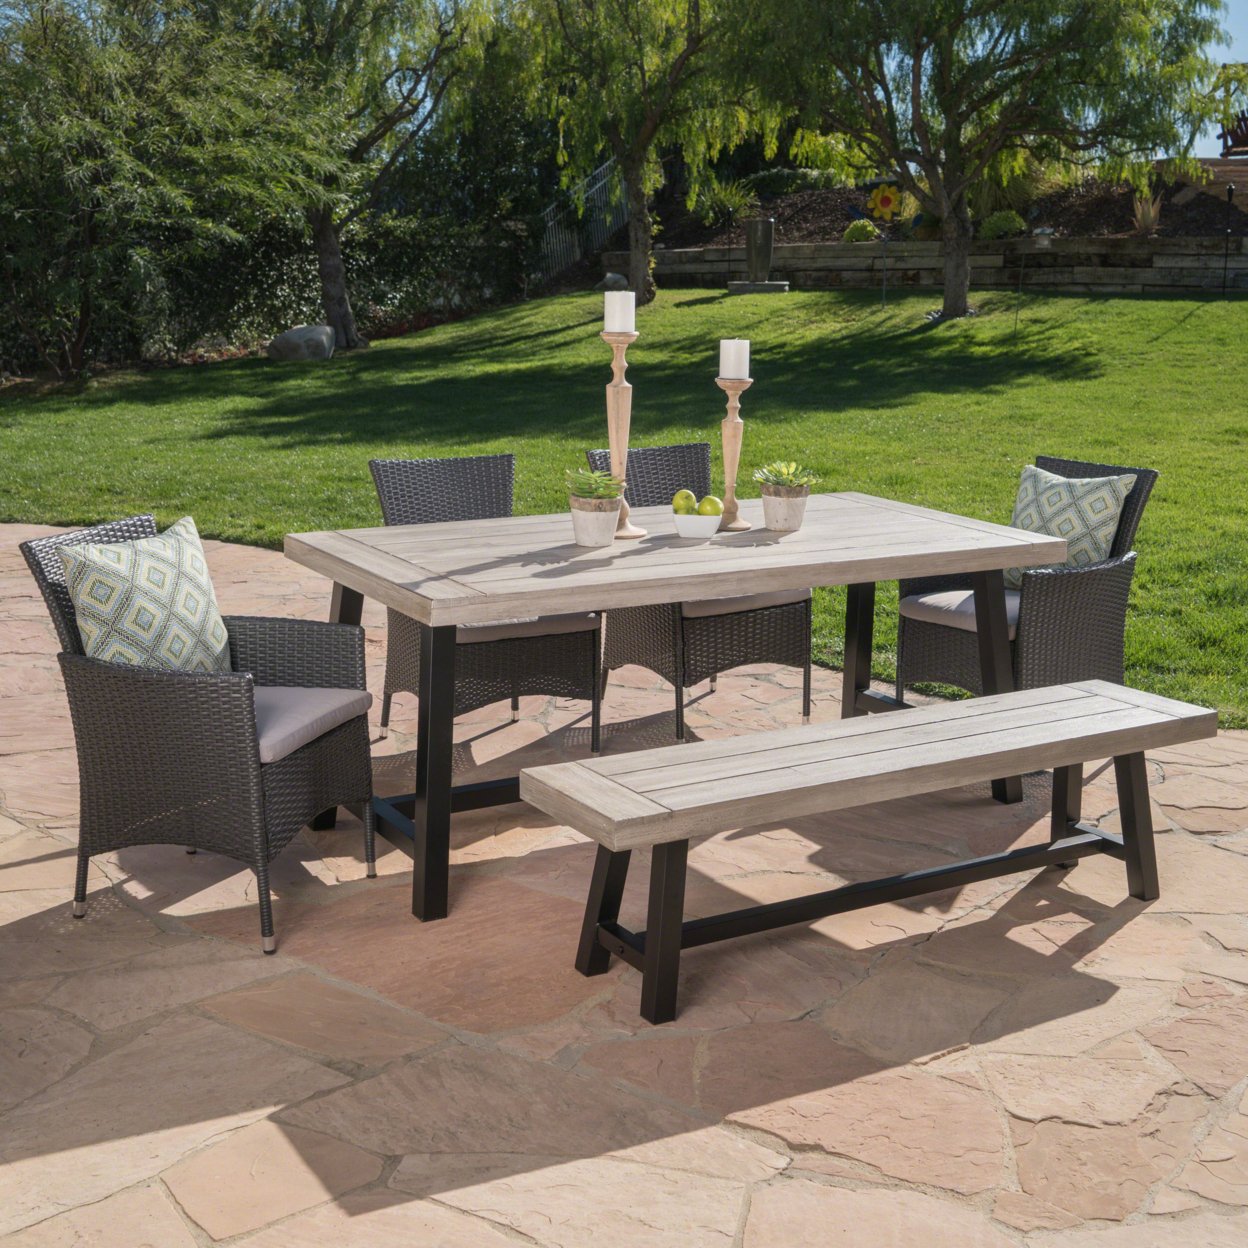 Linda Outdoor 6 Piece Wicker Dining Set With Acacia Wood Table And Bench - Gray/Light Gray/Silver